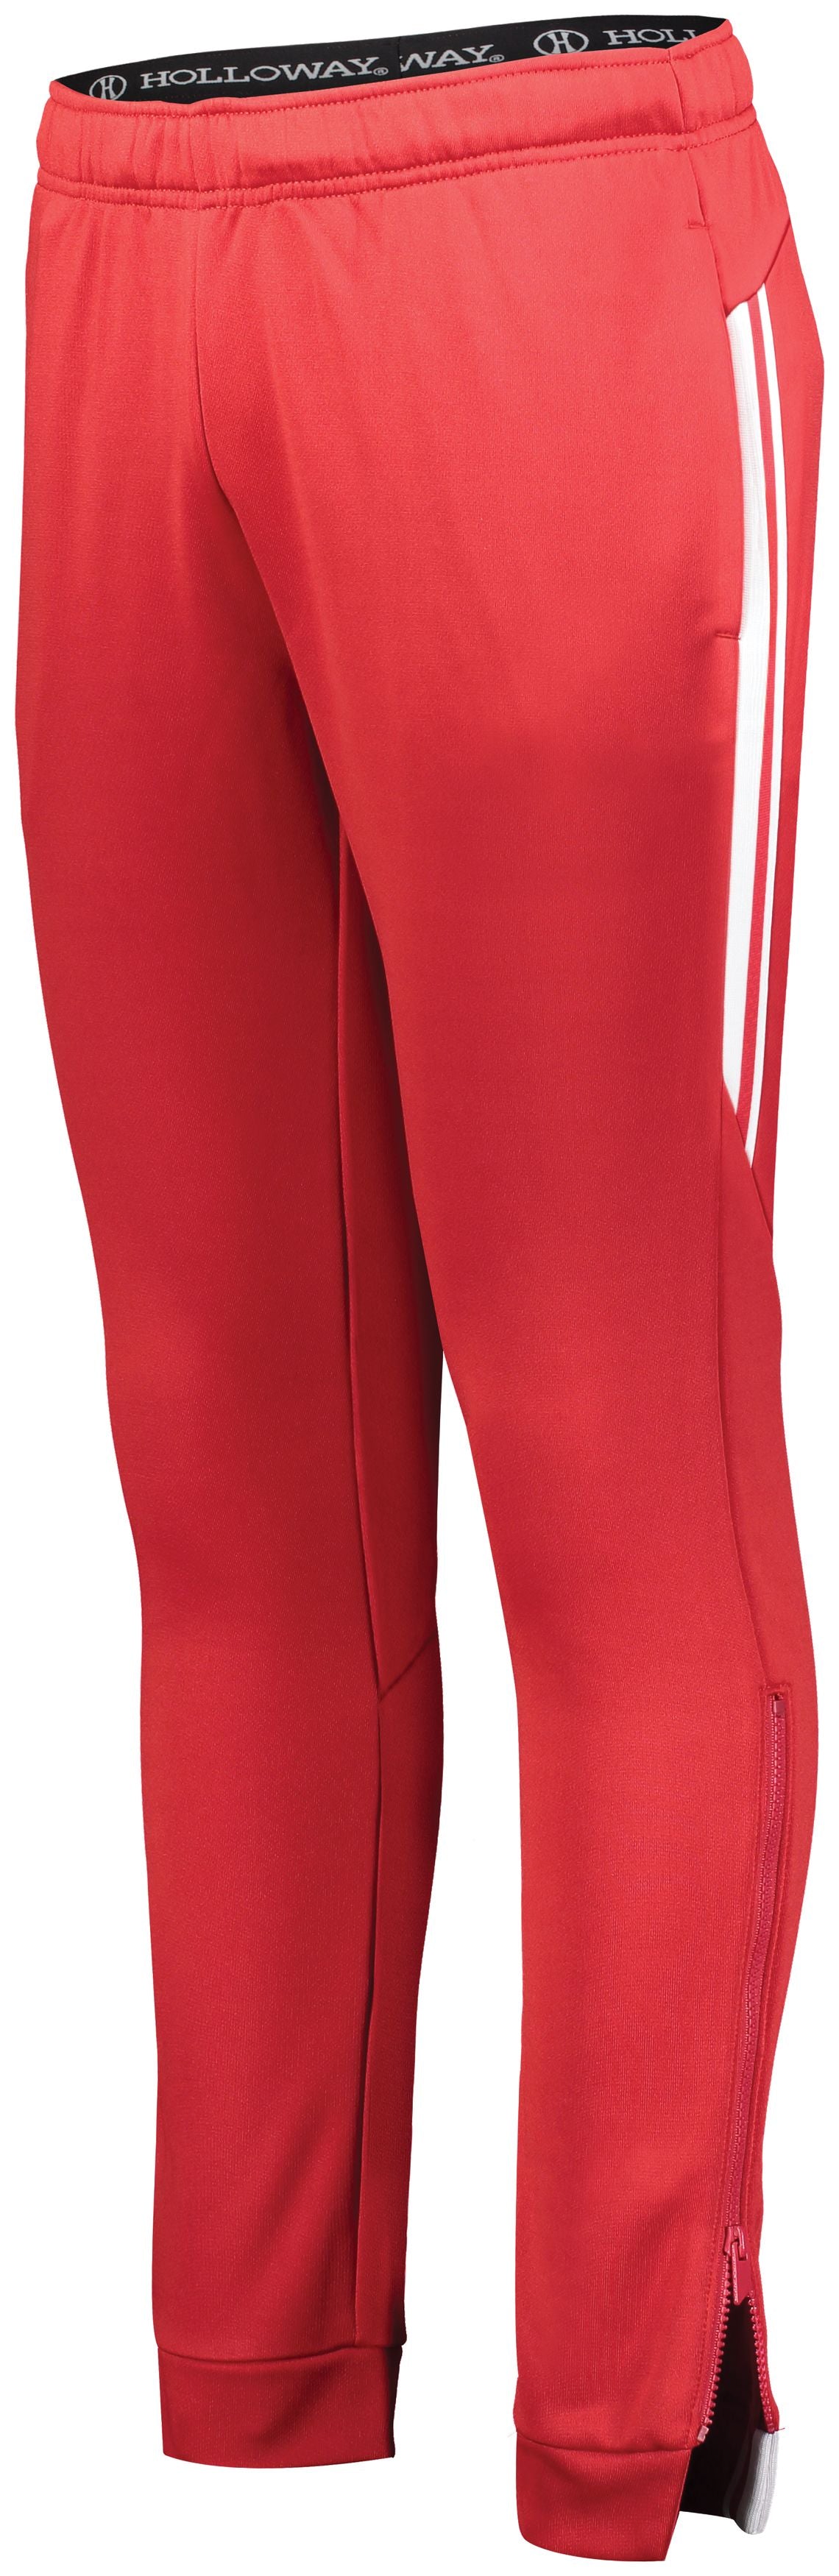 Holloway Ladies Retro Grade Pant in Scarlet/White  -Part of the Ladies, Ladies-Pants, Pants, Holloway product lines at KanaleyCreations.com